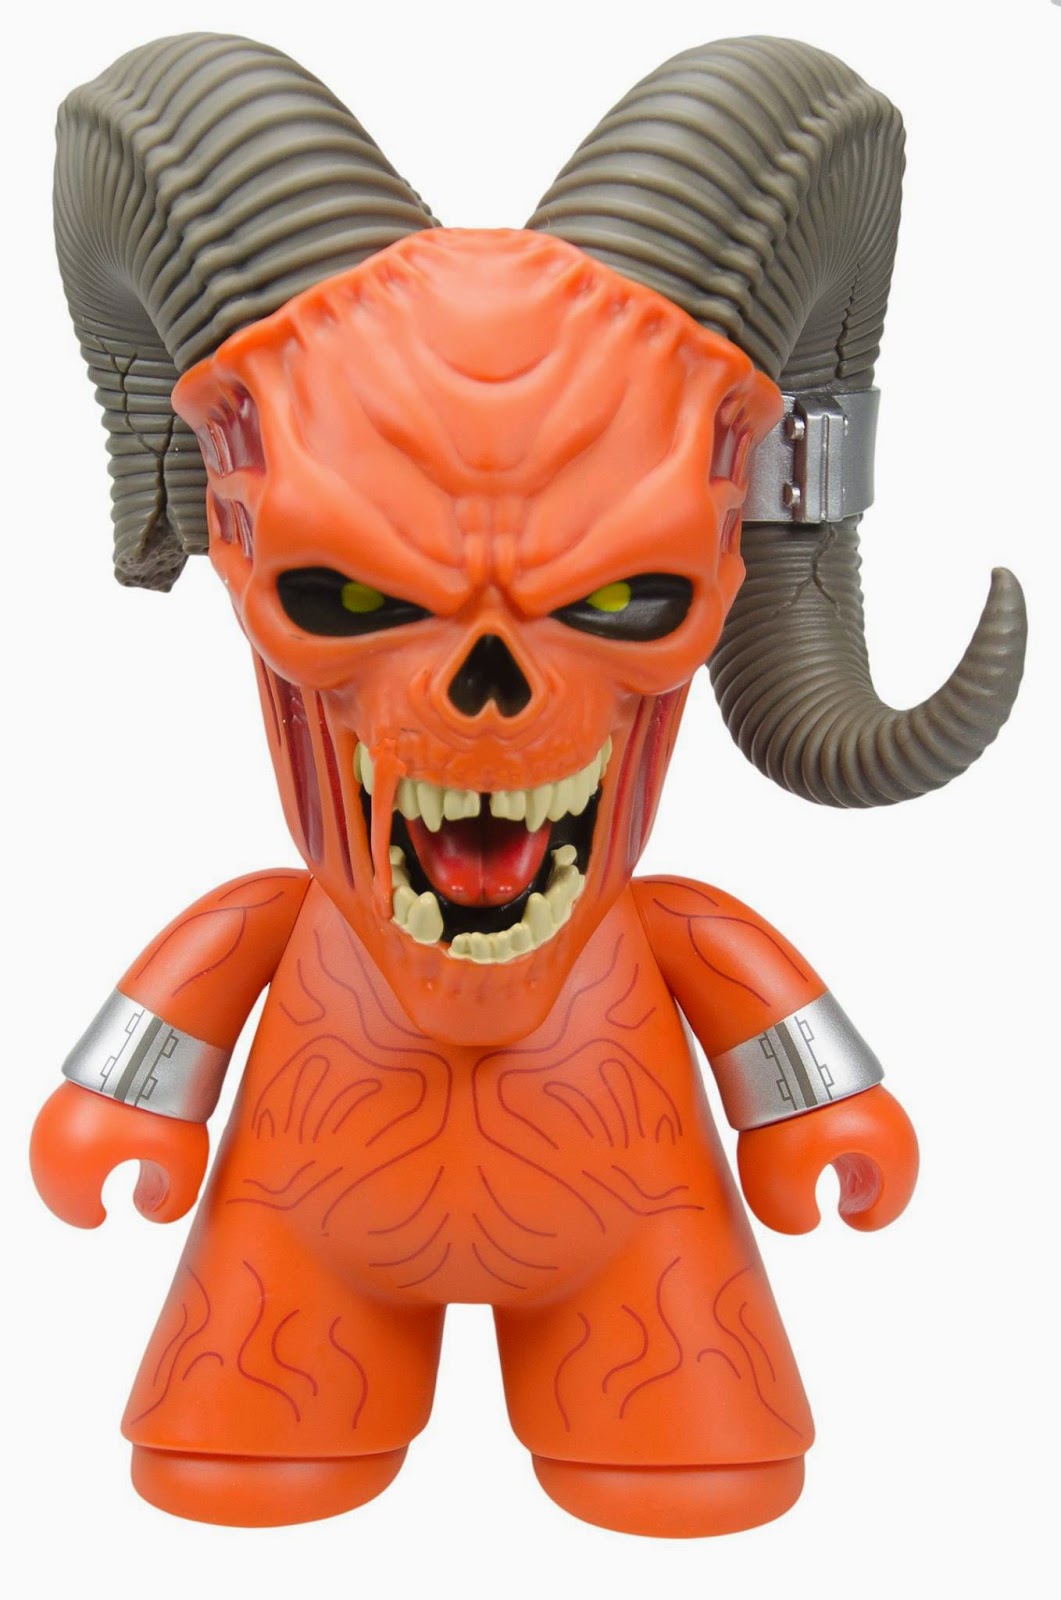 San Diego Comic-Con 2014 Exclusive Doctor Who “The Beast” Titans 9” Vinyl Figure